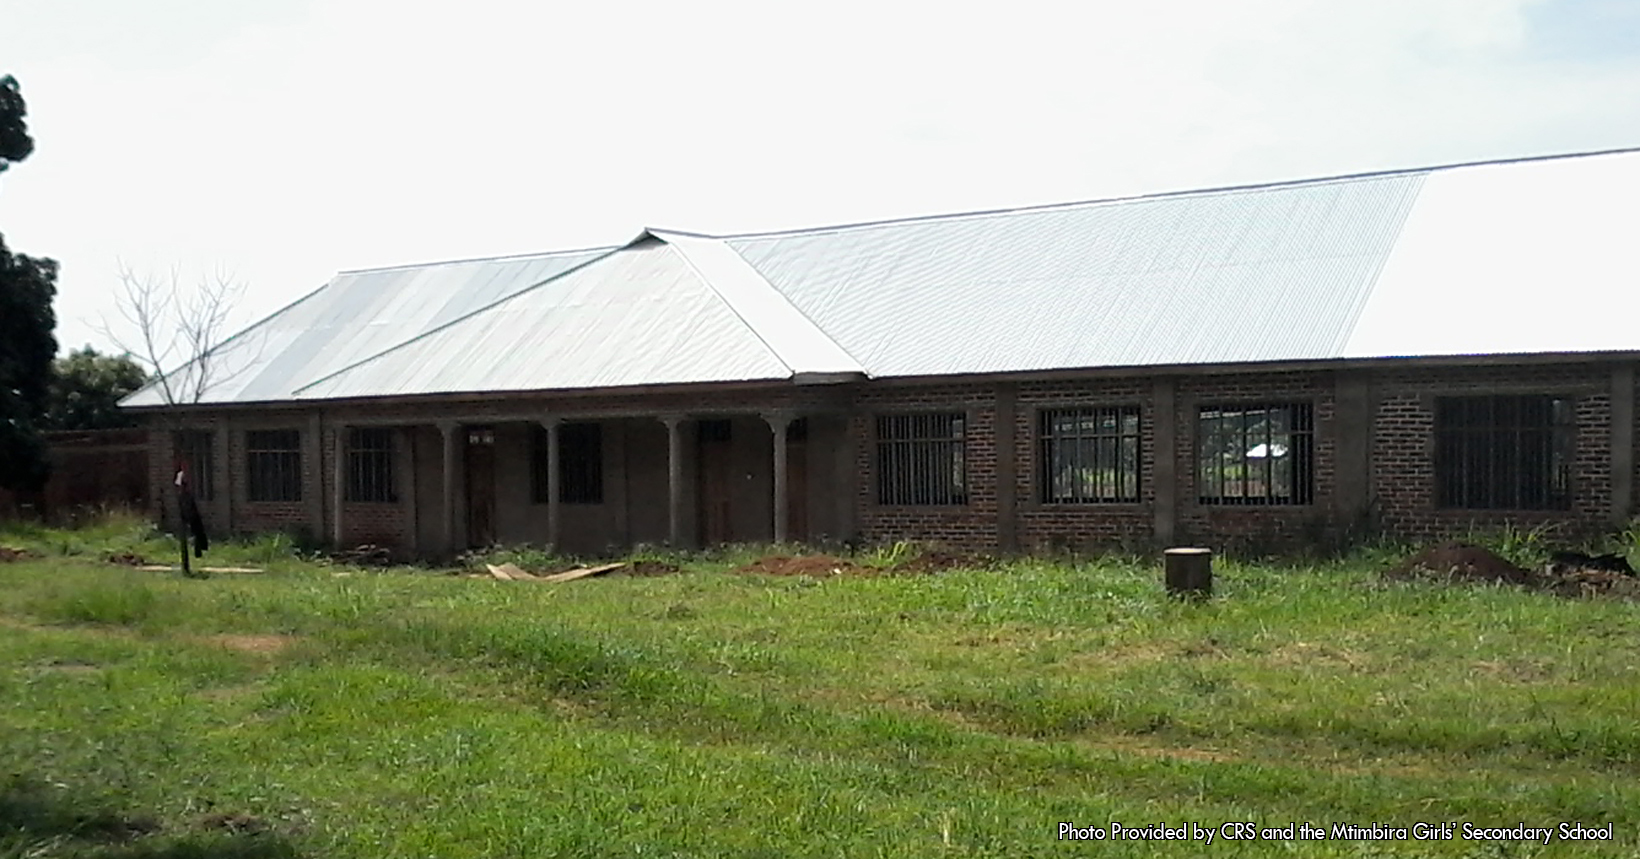 This picture was taken outside of Tanzania and was provided to us by the Catholic Relief Services. This building is part of the Mahenge School that houses the labs. The building is under construction since as of the time of the photo, the building has some structural damage. In addition, the grass plain in front of the building has dead grass and pieces of wood laying out in front of it. Furthermore, there are piles of dirt all along the front of the building. There is one patch of dirt on the right side of the picture and another located directly in front of the doors to the lab. The building also is made out of bricks and has five columns located in the front of the building. Not to mention, the top of the building is also white in color. The labs in this building are used for three subjects, biology, physics, and chemistry. These three subjects are very crucial in the education of the young girls in Tanzania. These three subjects are used in a lot of the areas of everyday life. For instance, chemistry is very important to teach these young girls since everything is made of chemicals. Knowing even the basics of chemistry can help you cook, mix chemicals, give plants proper nutrients, and last but not least how to effectively use drugs. As for physics, it is the basis of how the world we live in operates. Most of the technology that the students in the Mahenge School will use came from Physics in one way or another. All the electricity in the building came from exploration in physics. As for biology, it literally means the study of life. In the biology labs the girls will understand how plants grow, the functions of the human body, and even the functions of animal bodies.